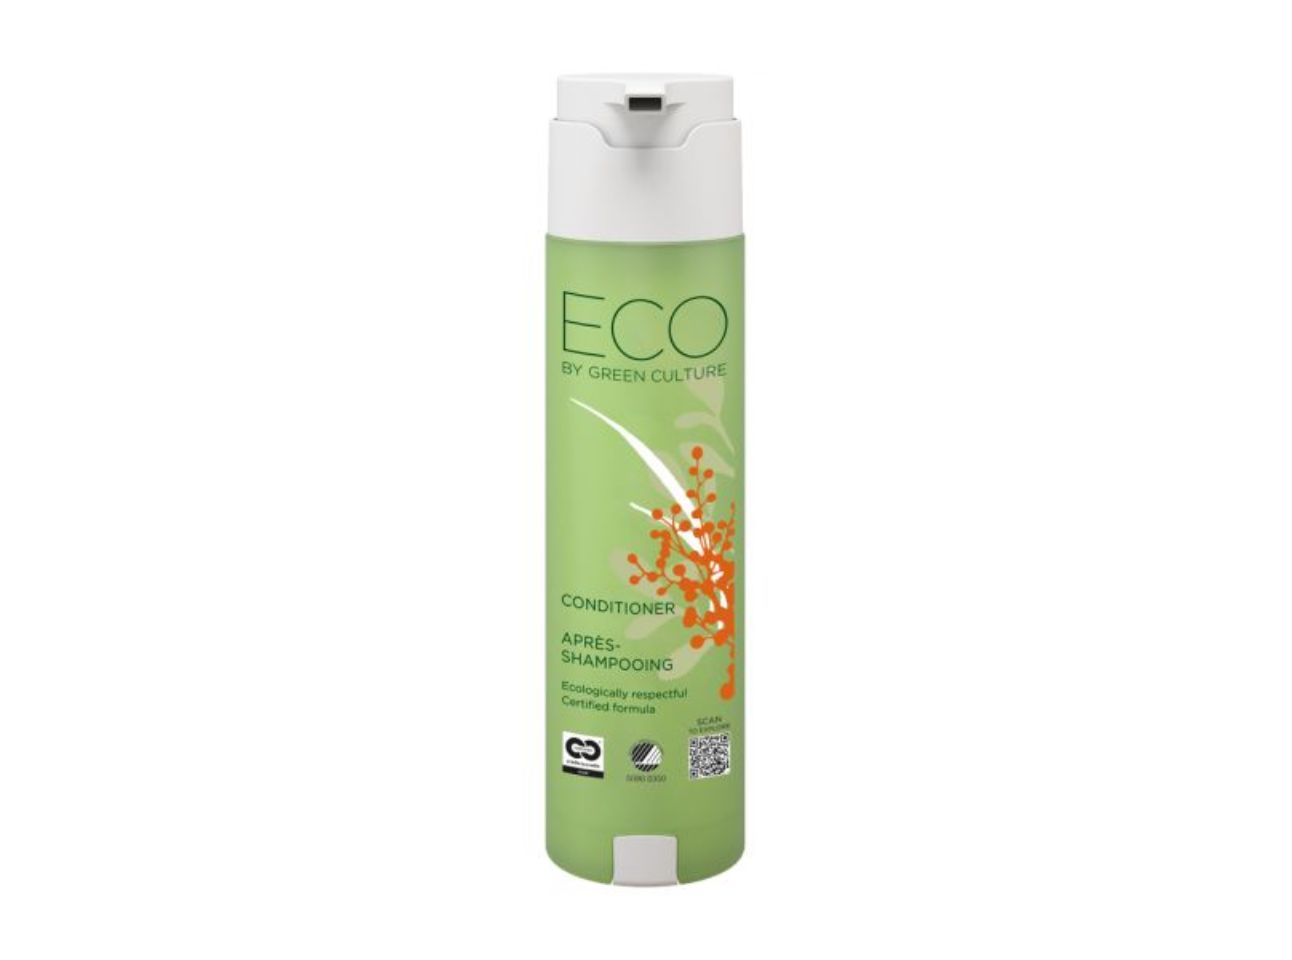 ECO by Green Culture - Conditioner, Shape dispenser, 300ml